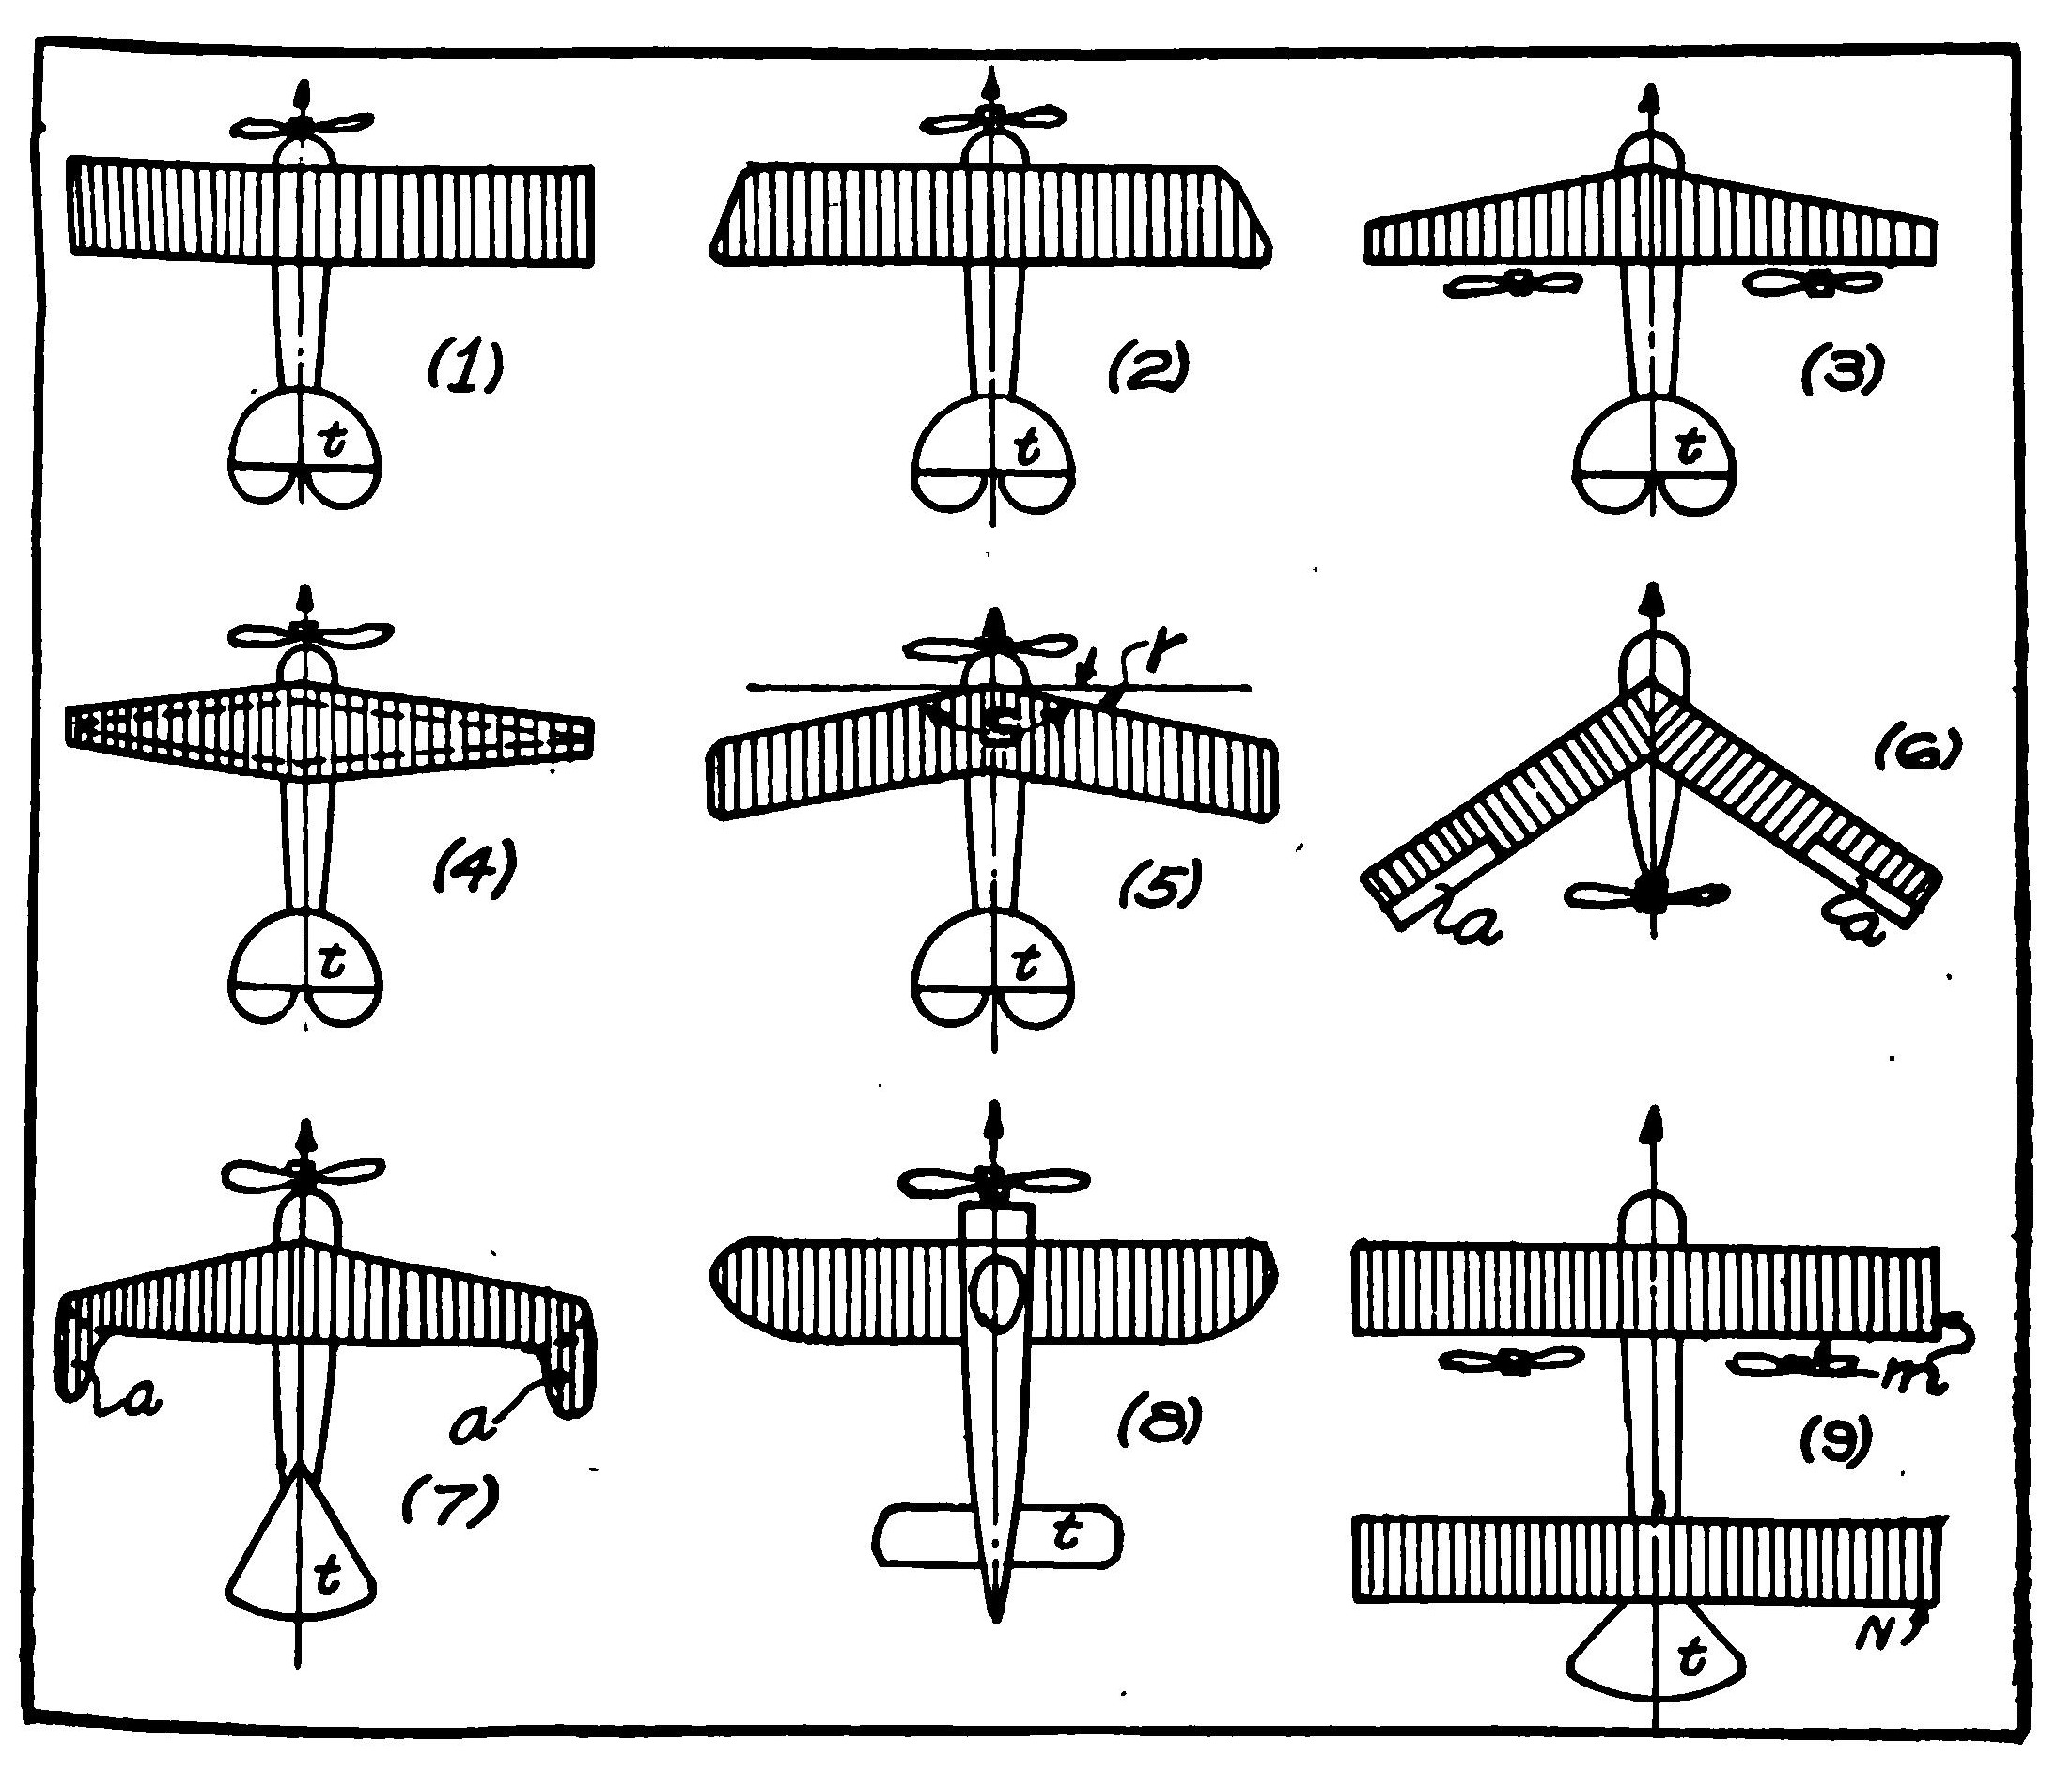 Figs. 1-9. Plan Views of Different Wing Arrangements and Wing Outlines.